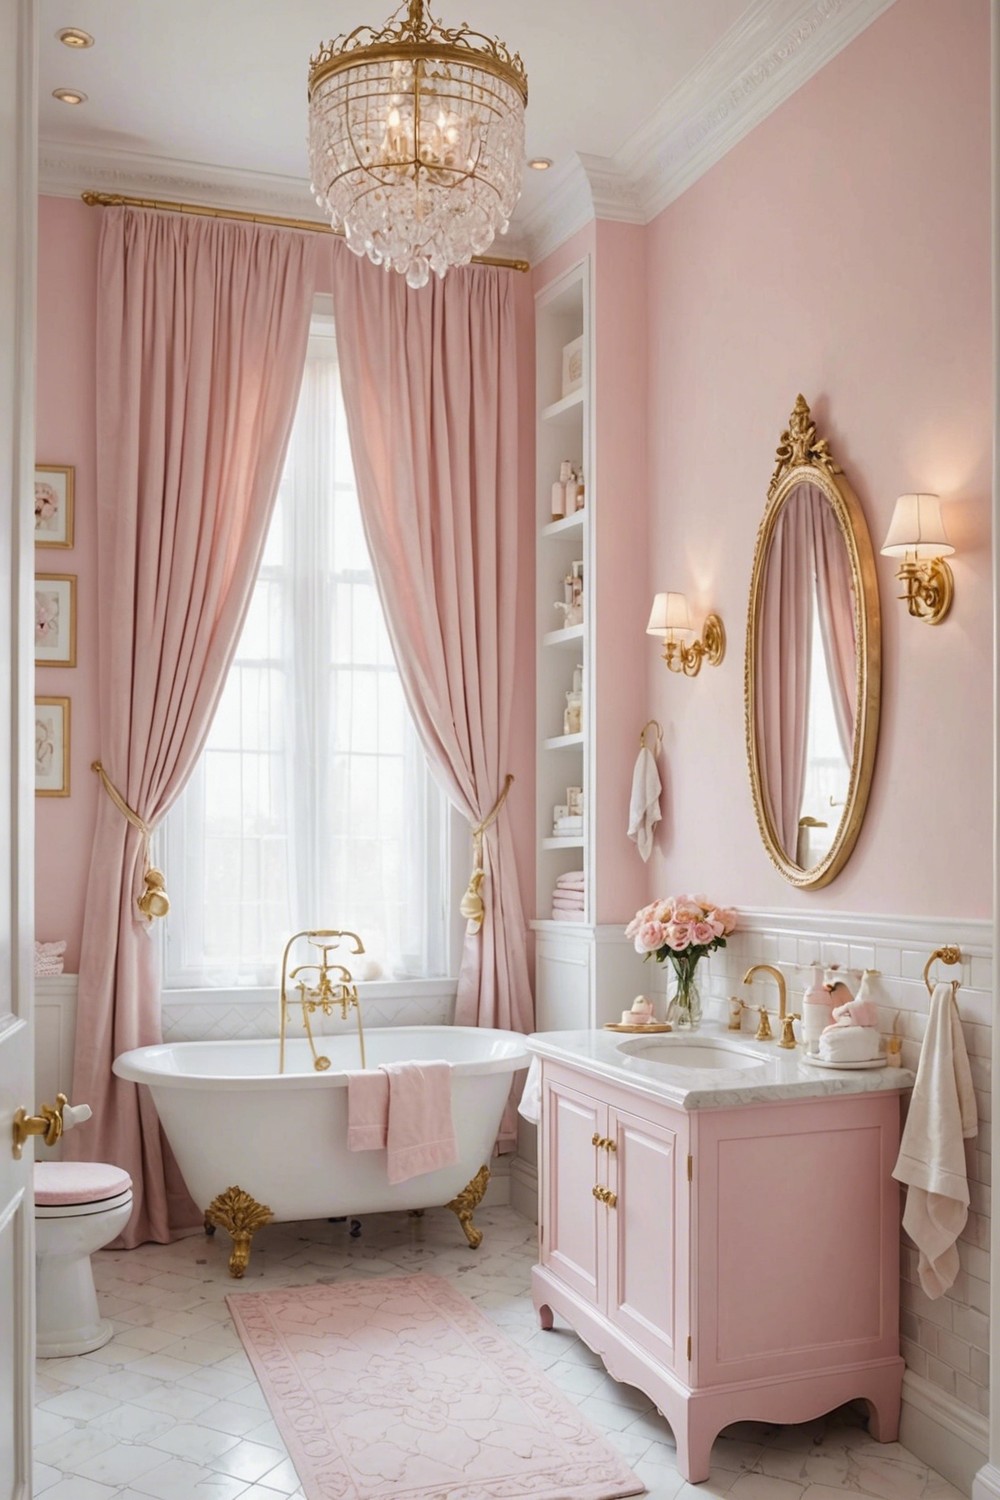 Pastel Pink and White Color Scheme